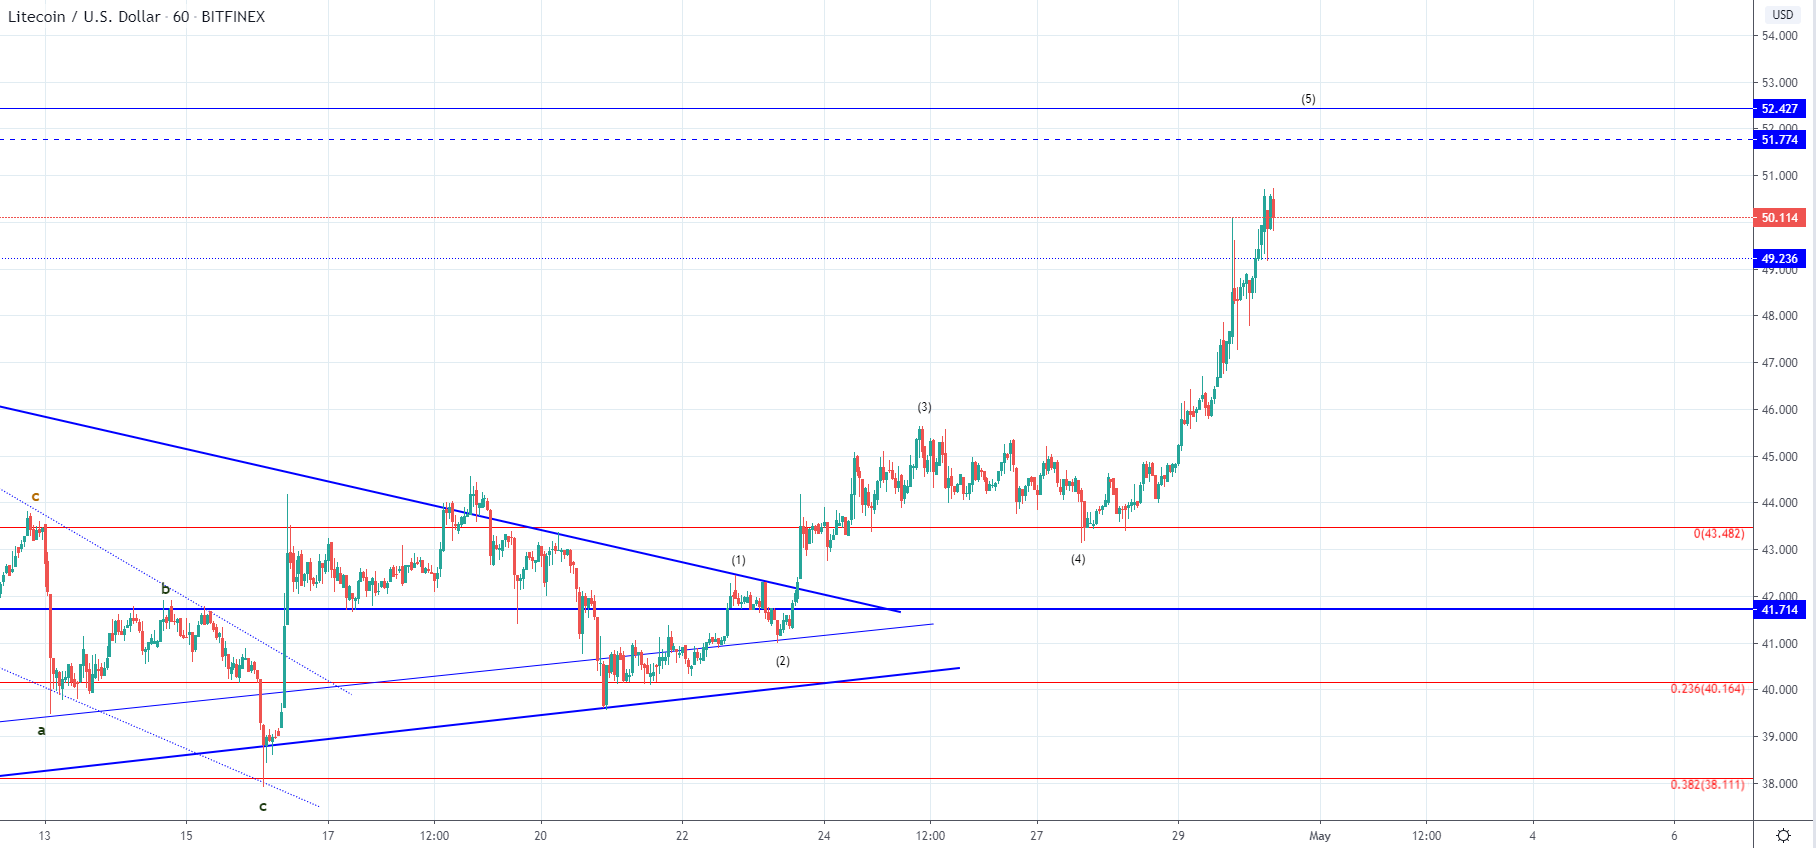 LTC and EOS - Parabolic increase could end shortly